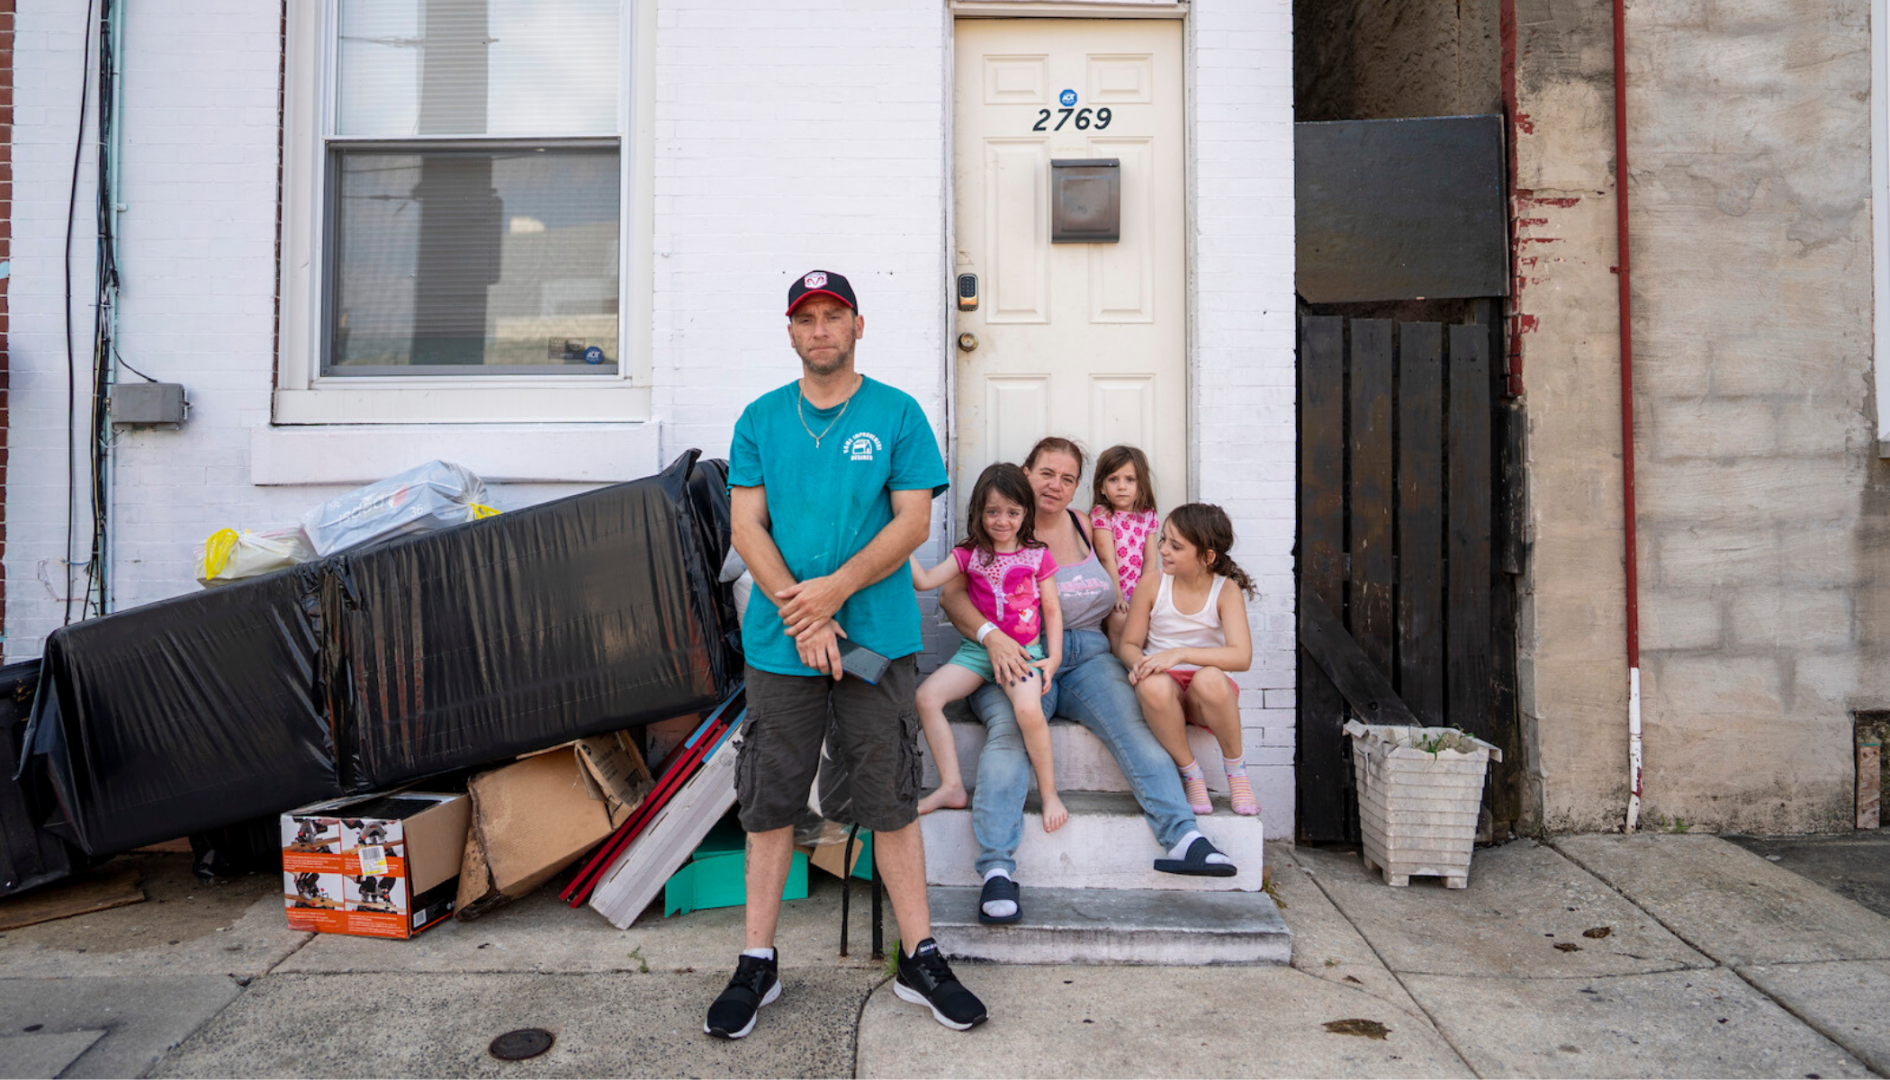 Mike Fallaro and Lisa Swinehart lost work during the pandemic and have been threatened with eviction from their Kensington rowhouse. Two of their three children are scheduled to start school this week. (Jessica Kourkounis for Keystone Crossroads)